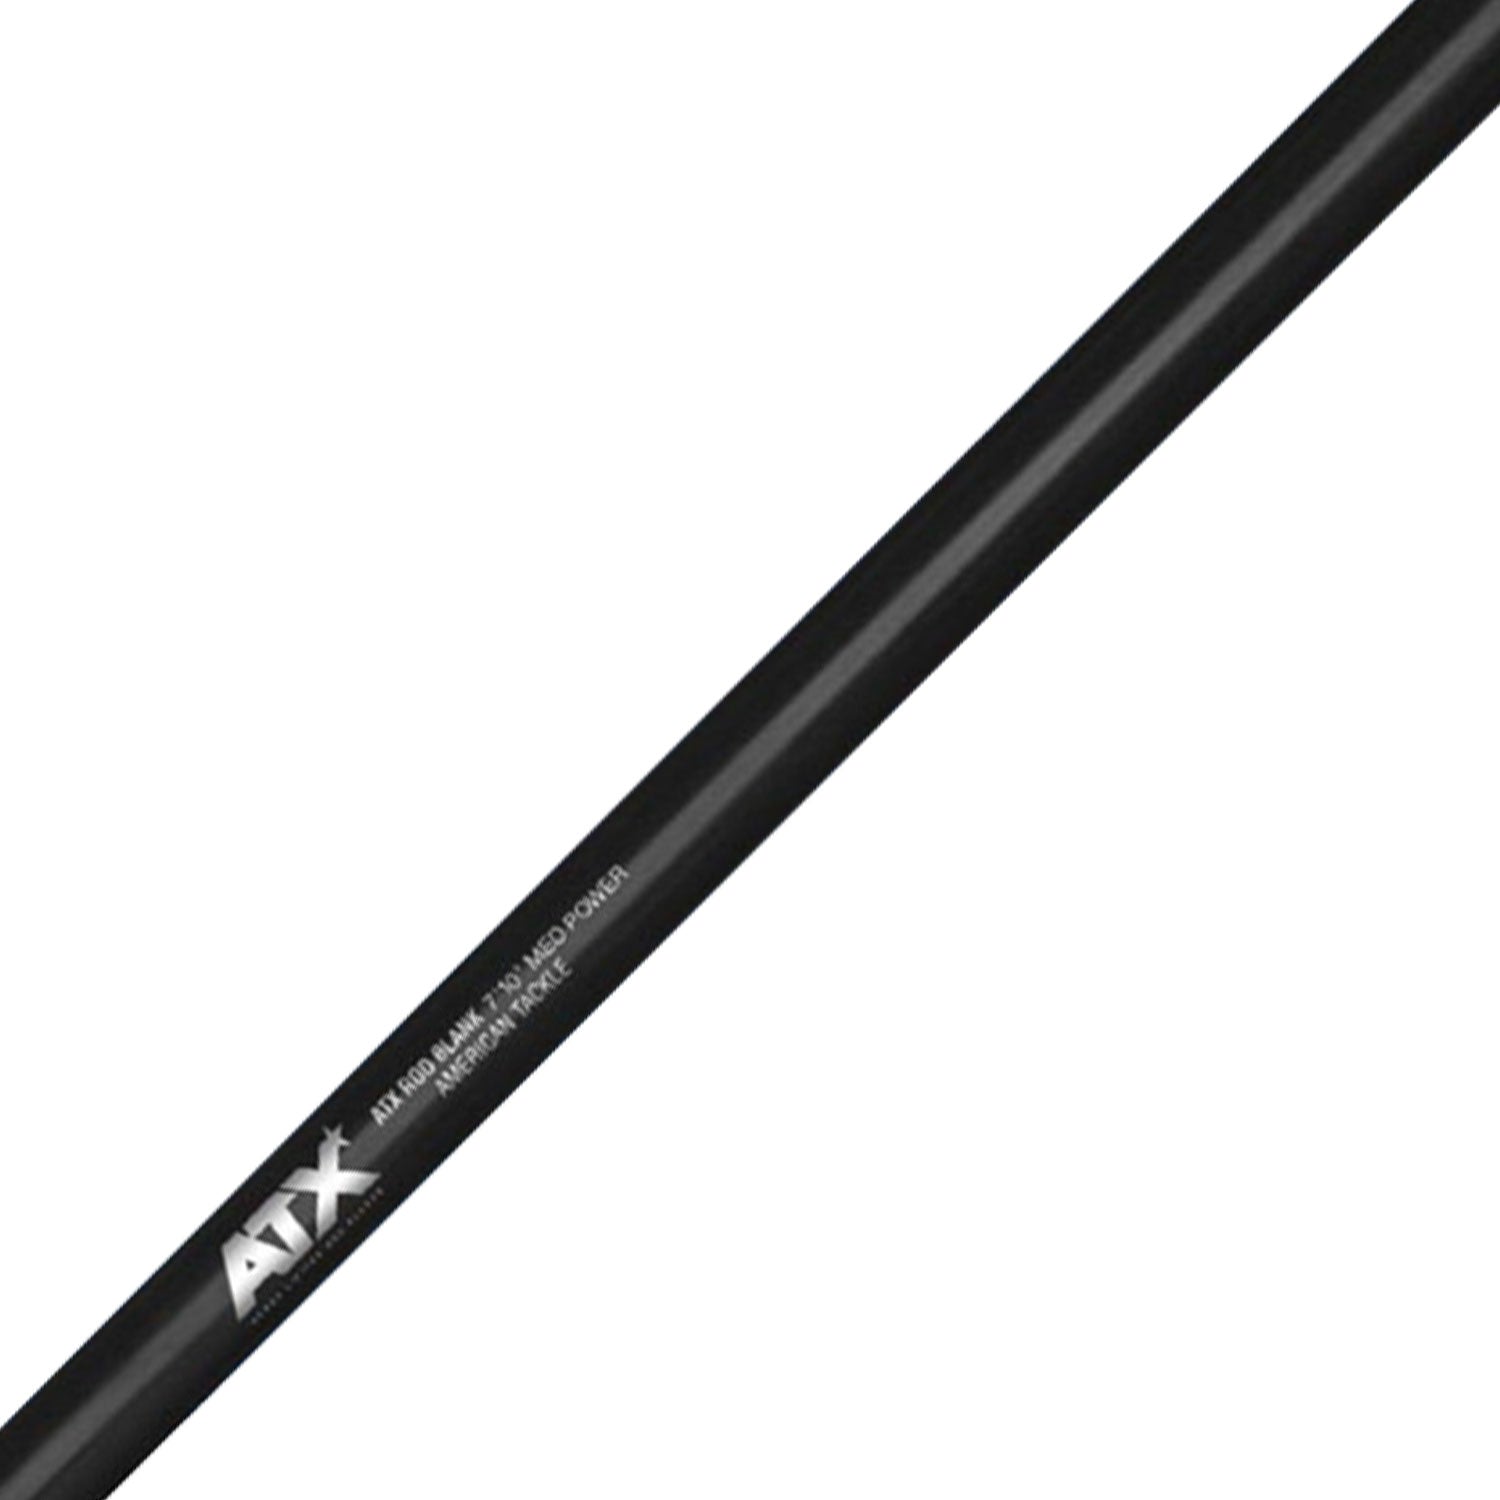 American Tackle AXST56H Stand-Up Tuna Rod Blank